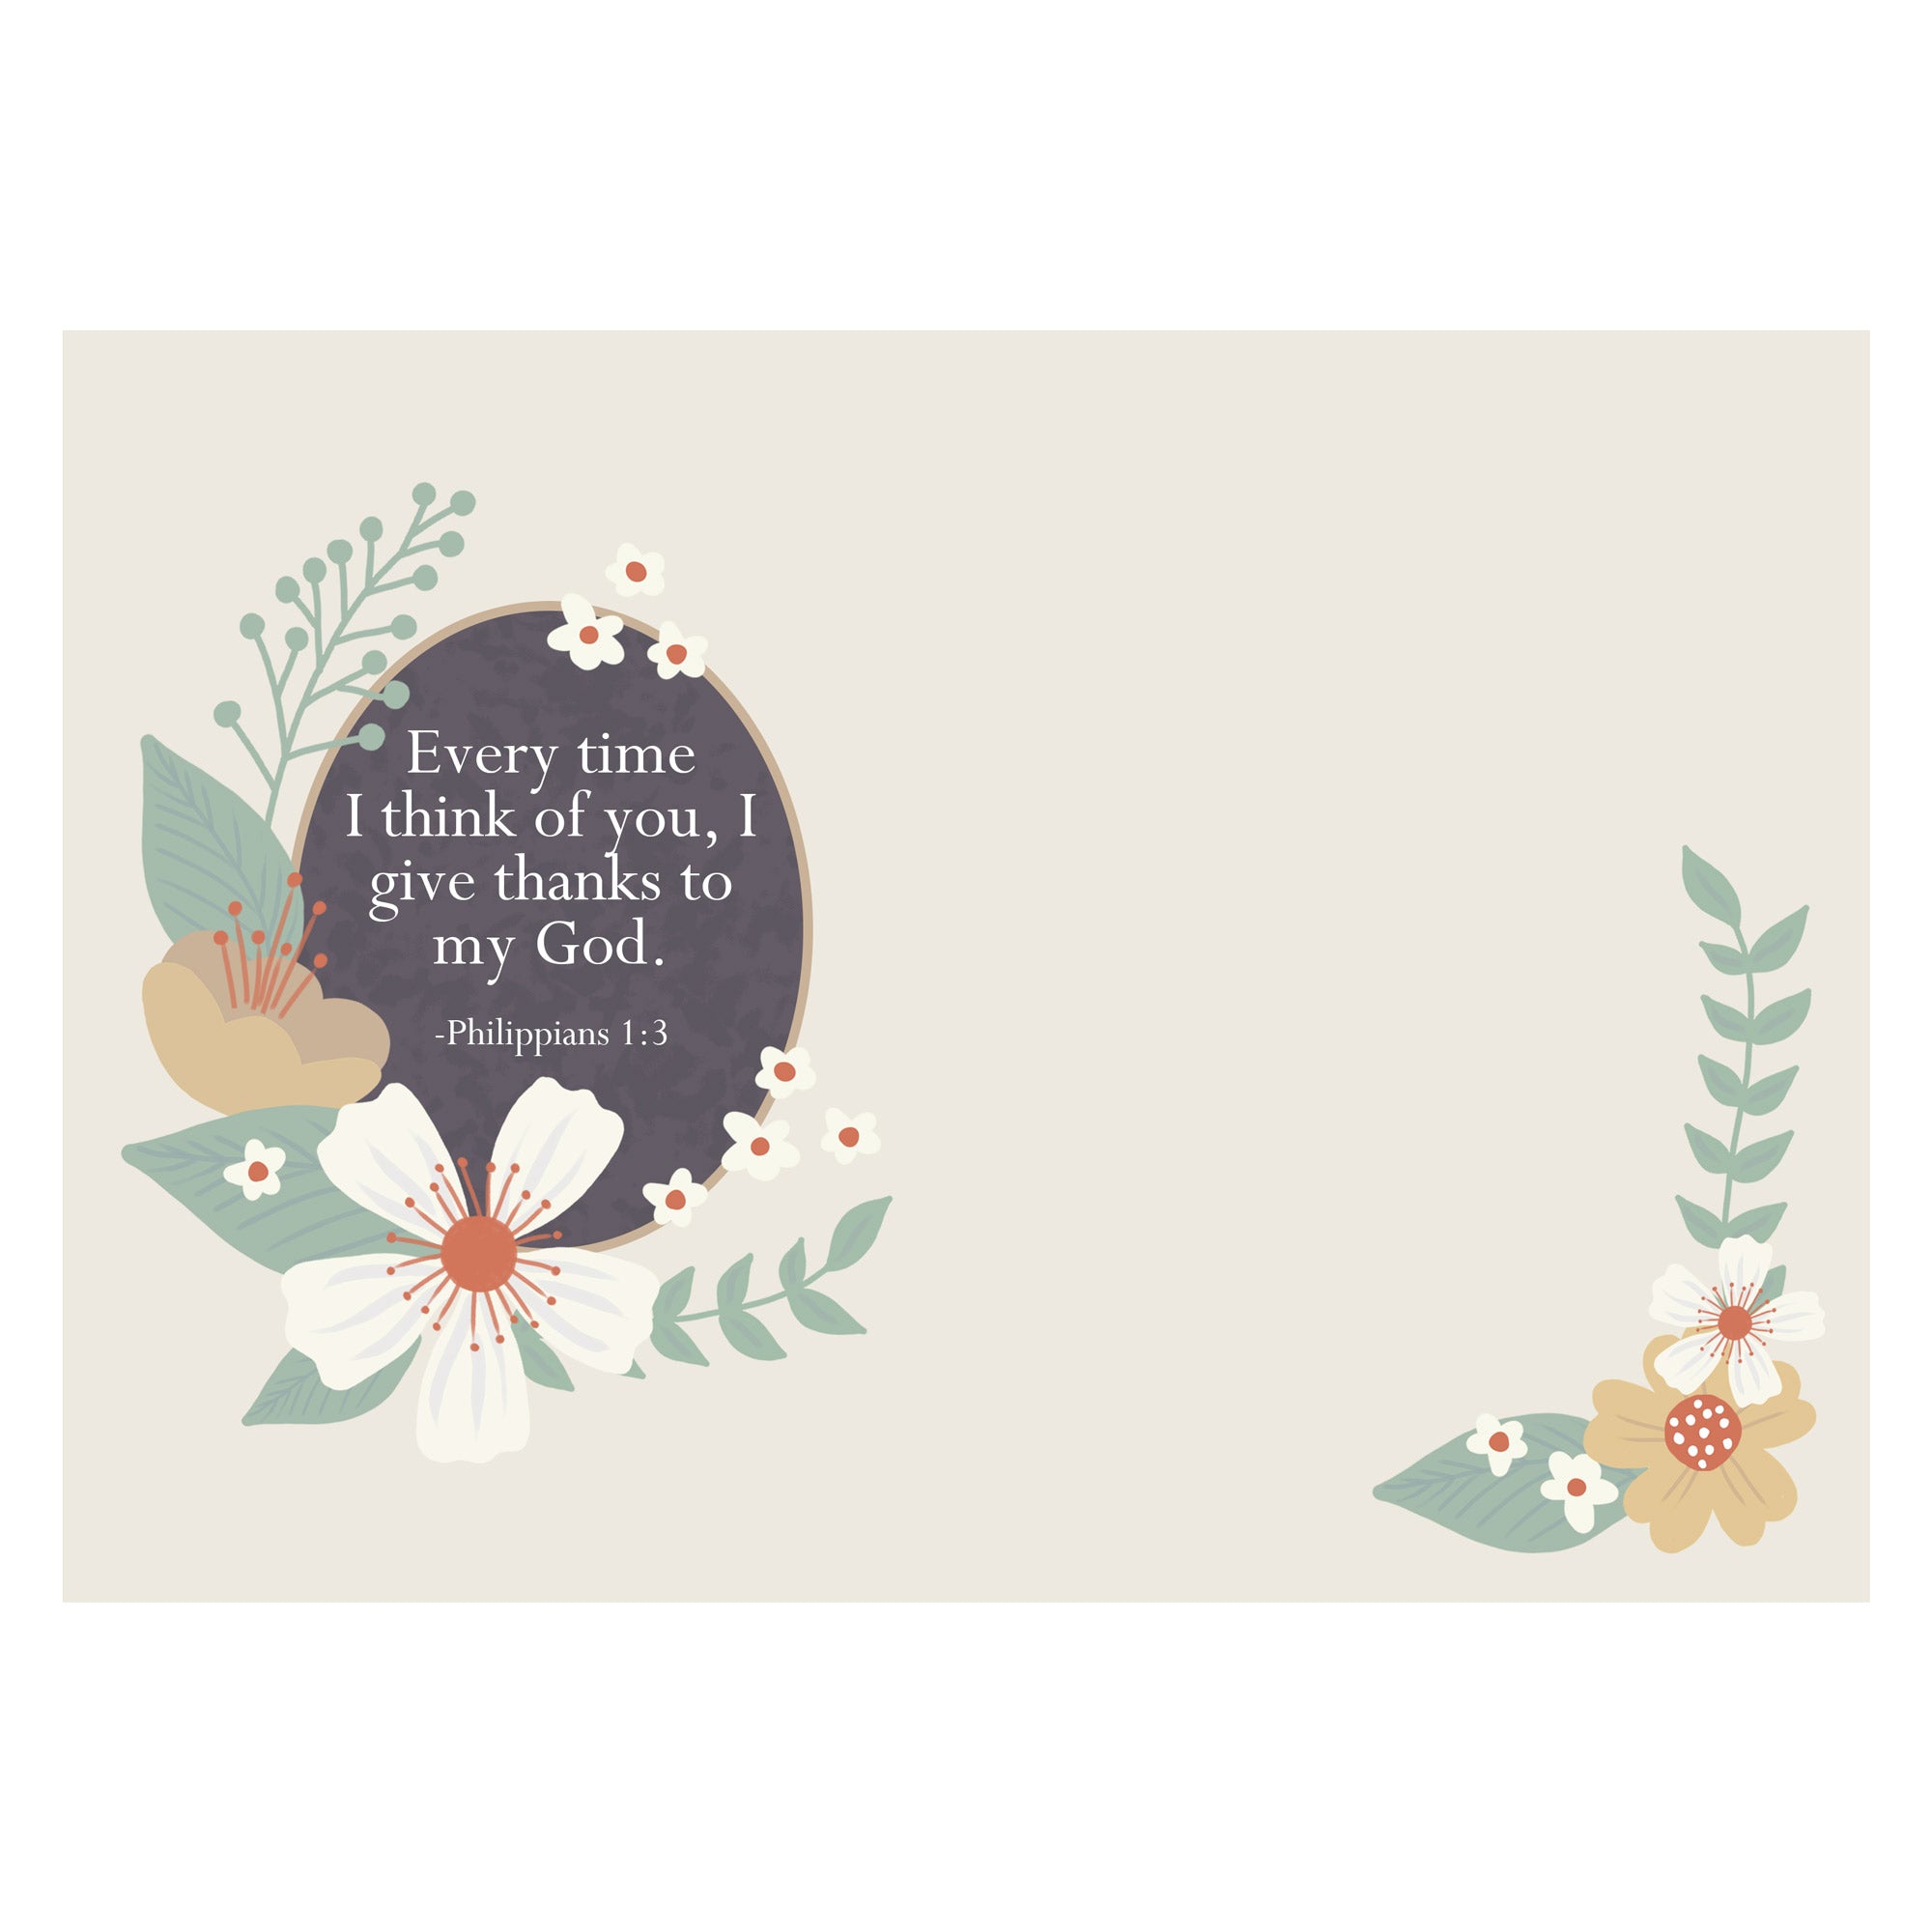 Boxed Cards: Thinking of You, Floral